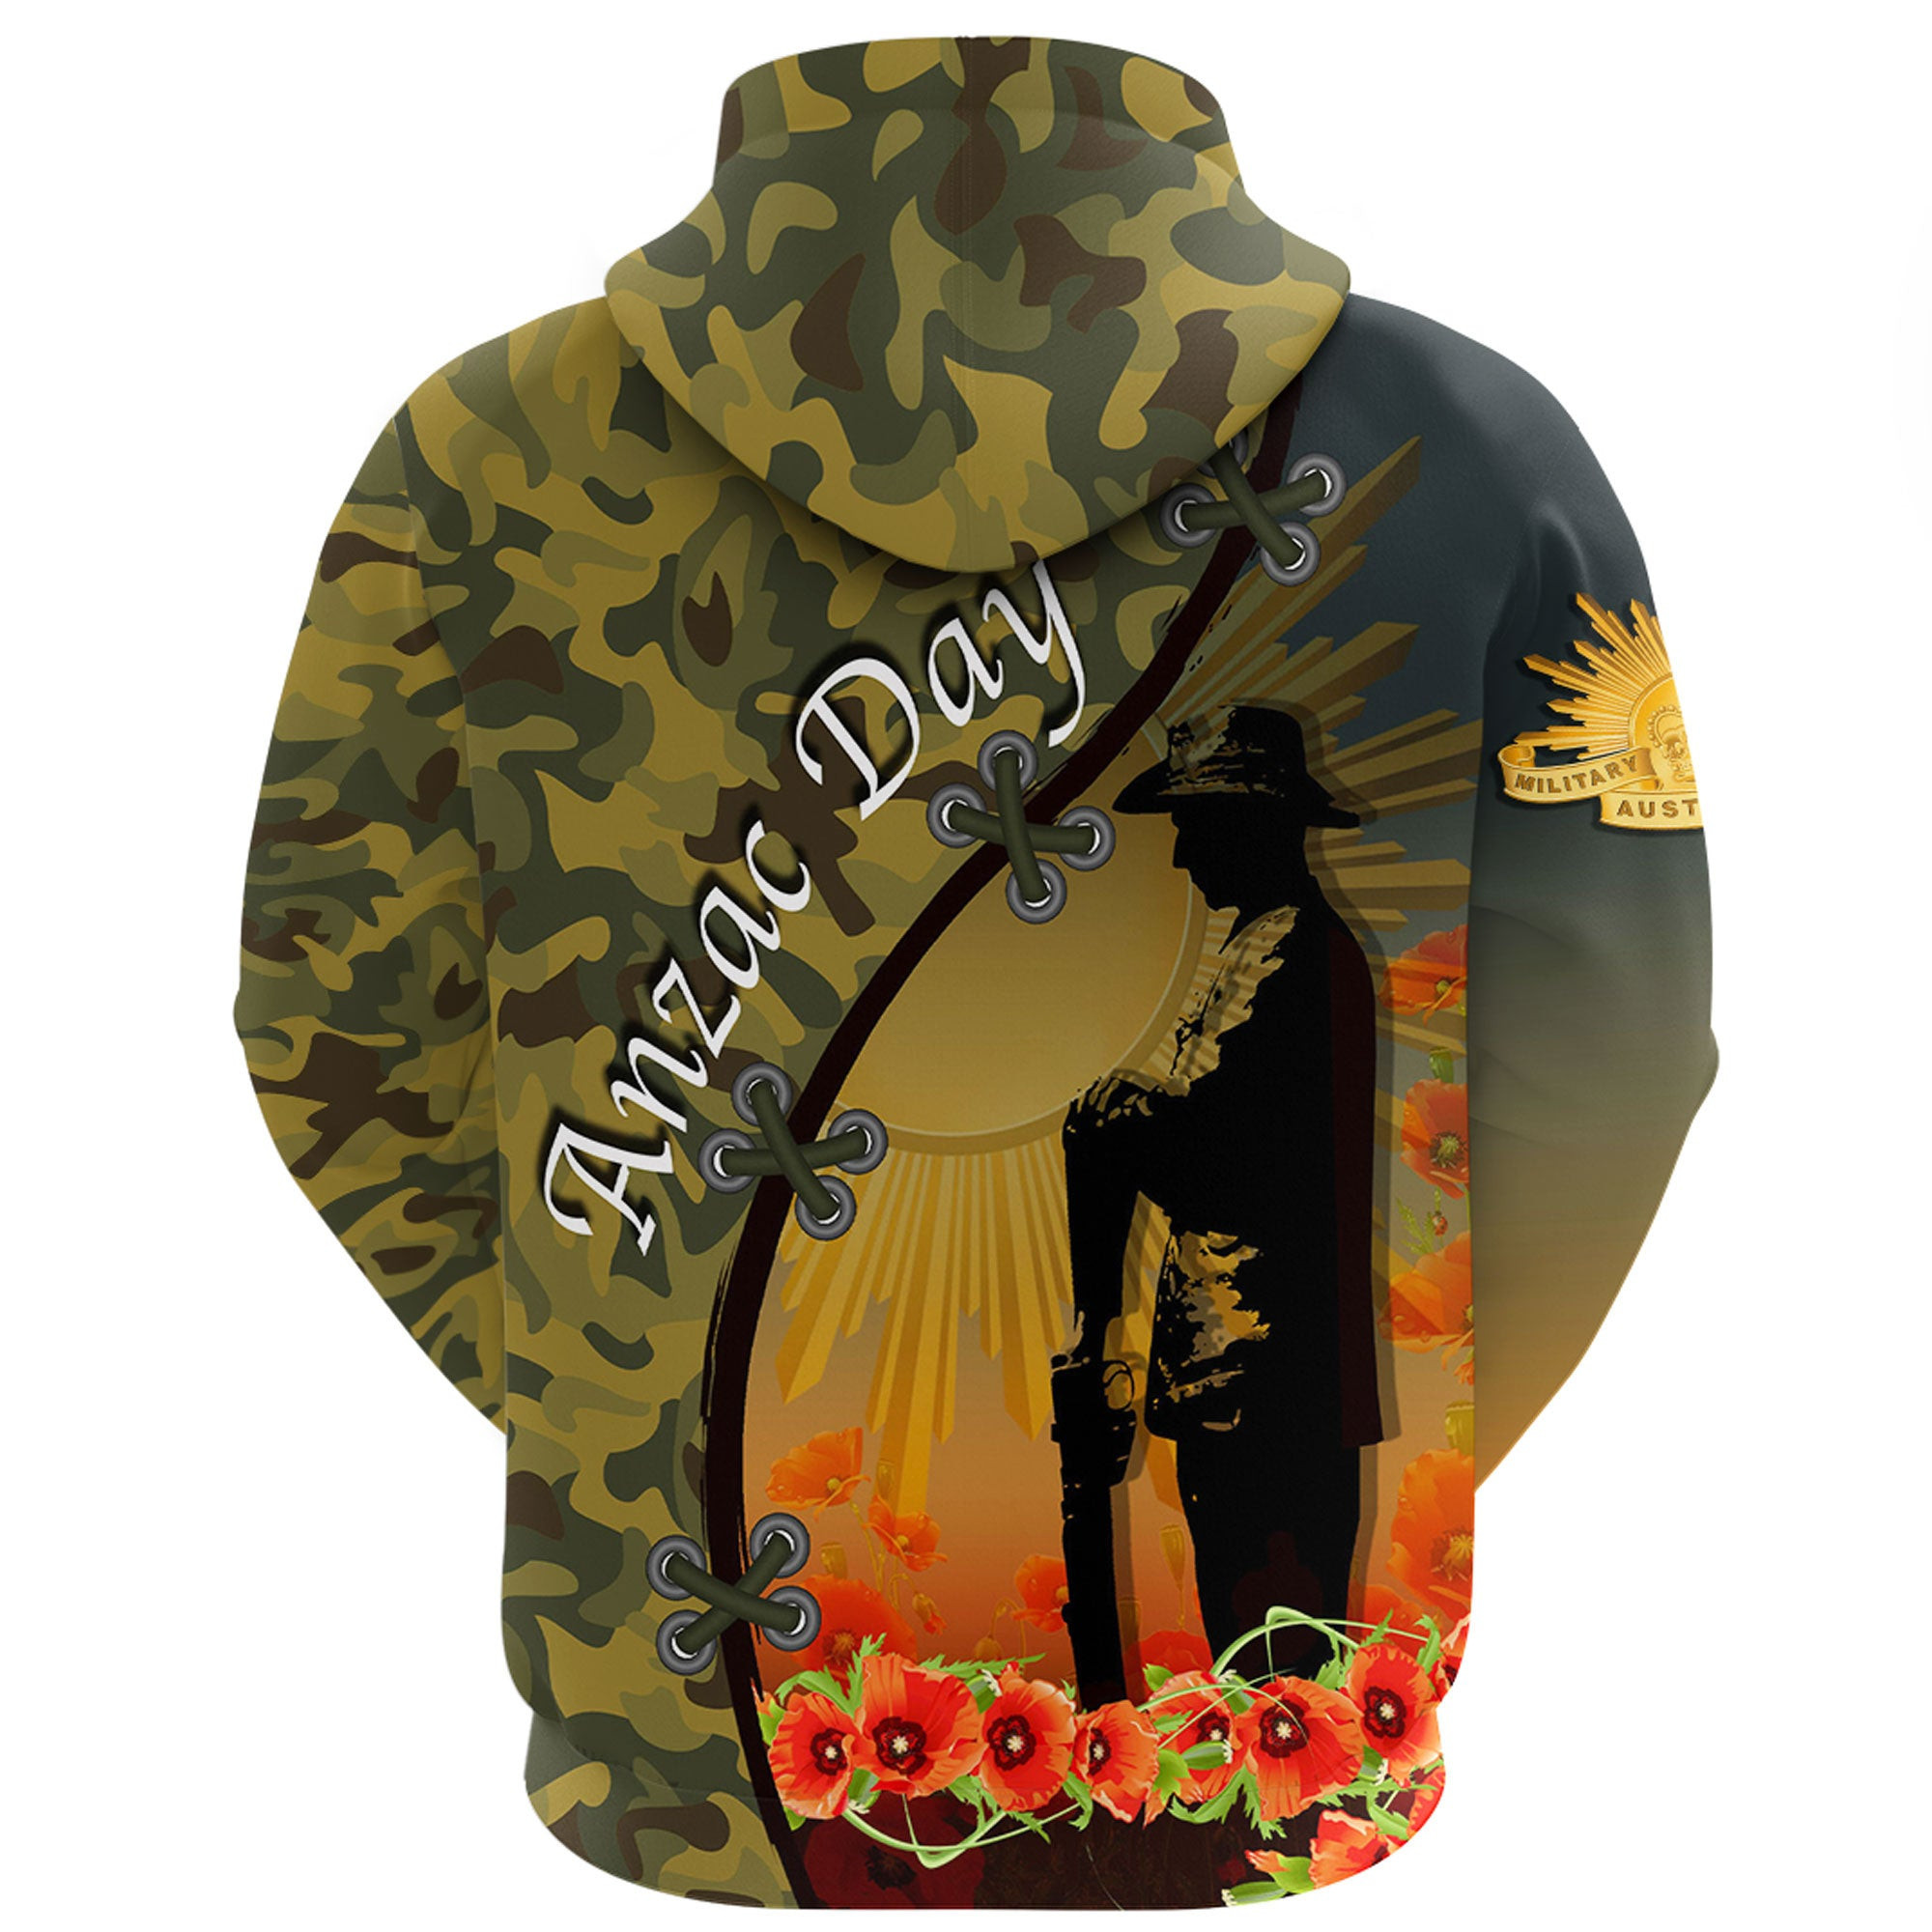 Love New Zealand Clothing - Anzac Day Camouflage Soldier Australian - Zip Hoodie A95 | Love New Zealand